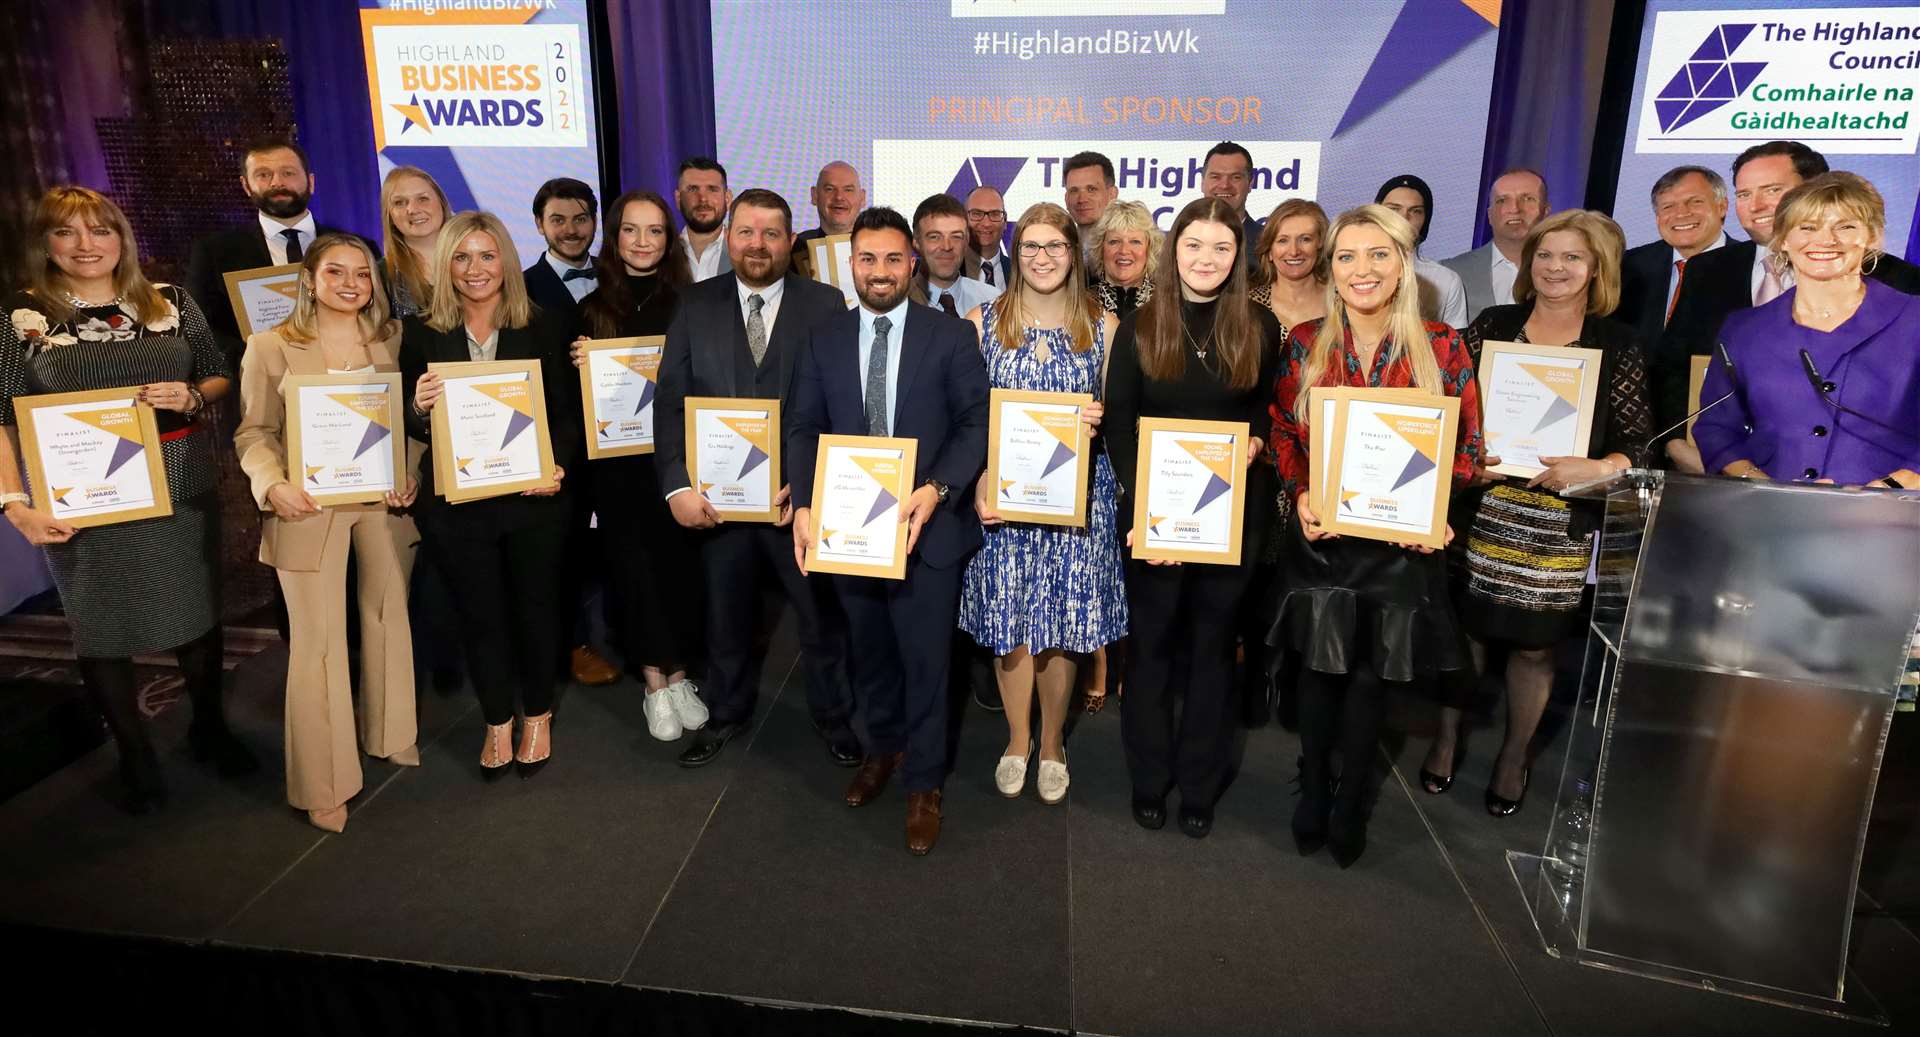 Highland Business Award finalists receive their certificates. Pictures: James Mackenzie